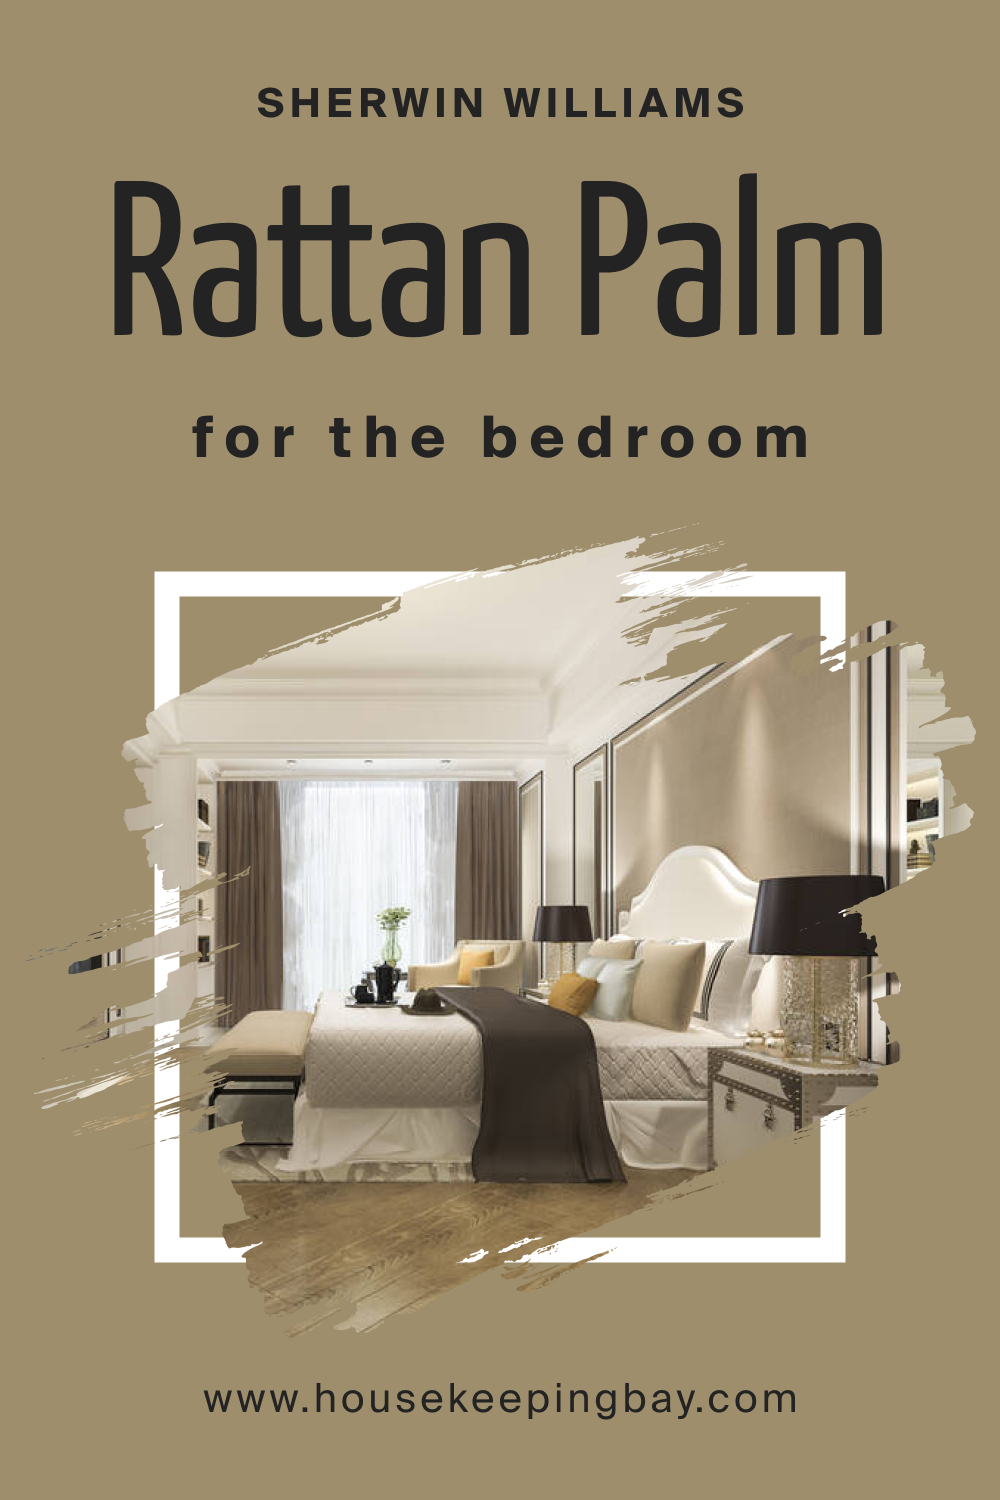 Sherwin Williams. SW 9533 Rattan Palm For the bedroom